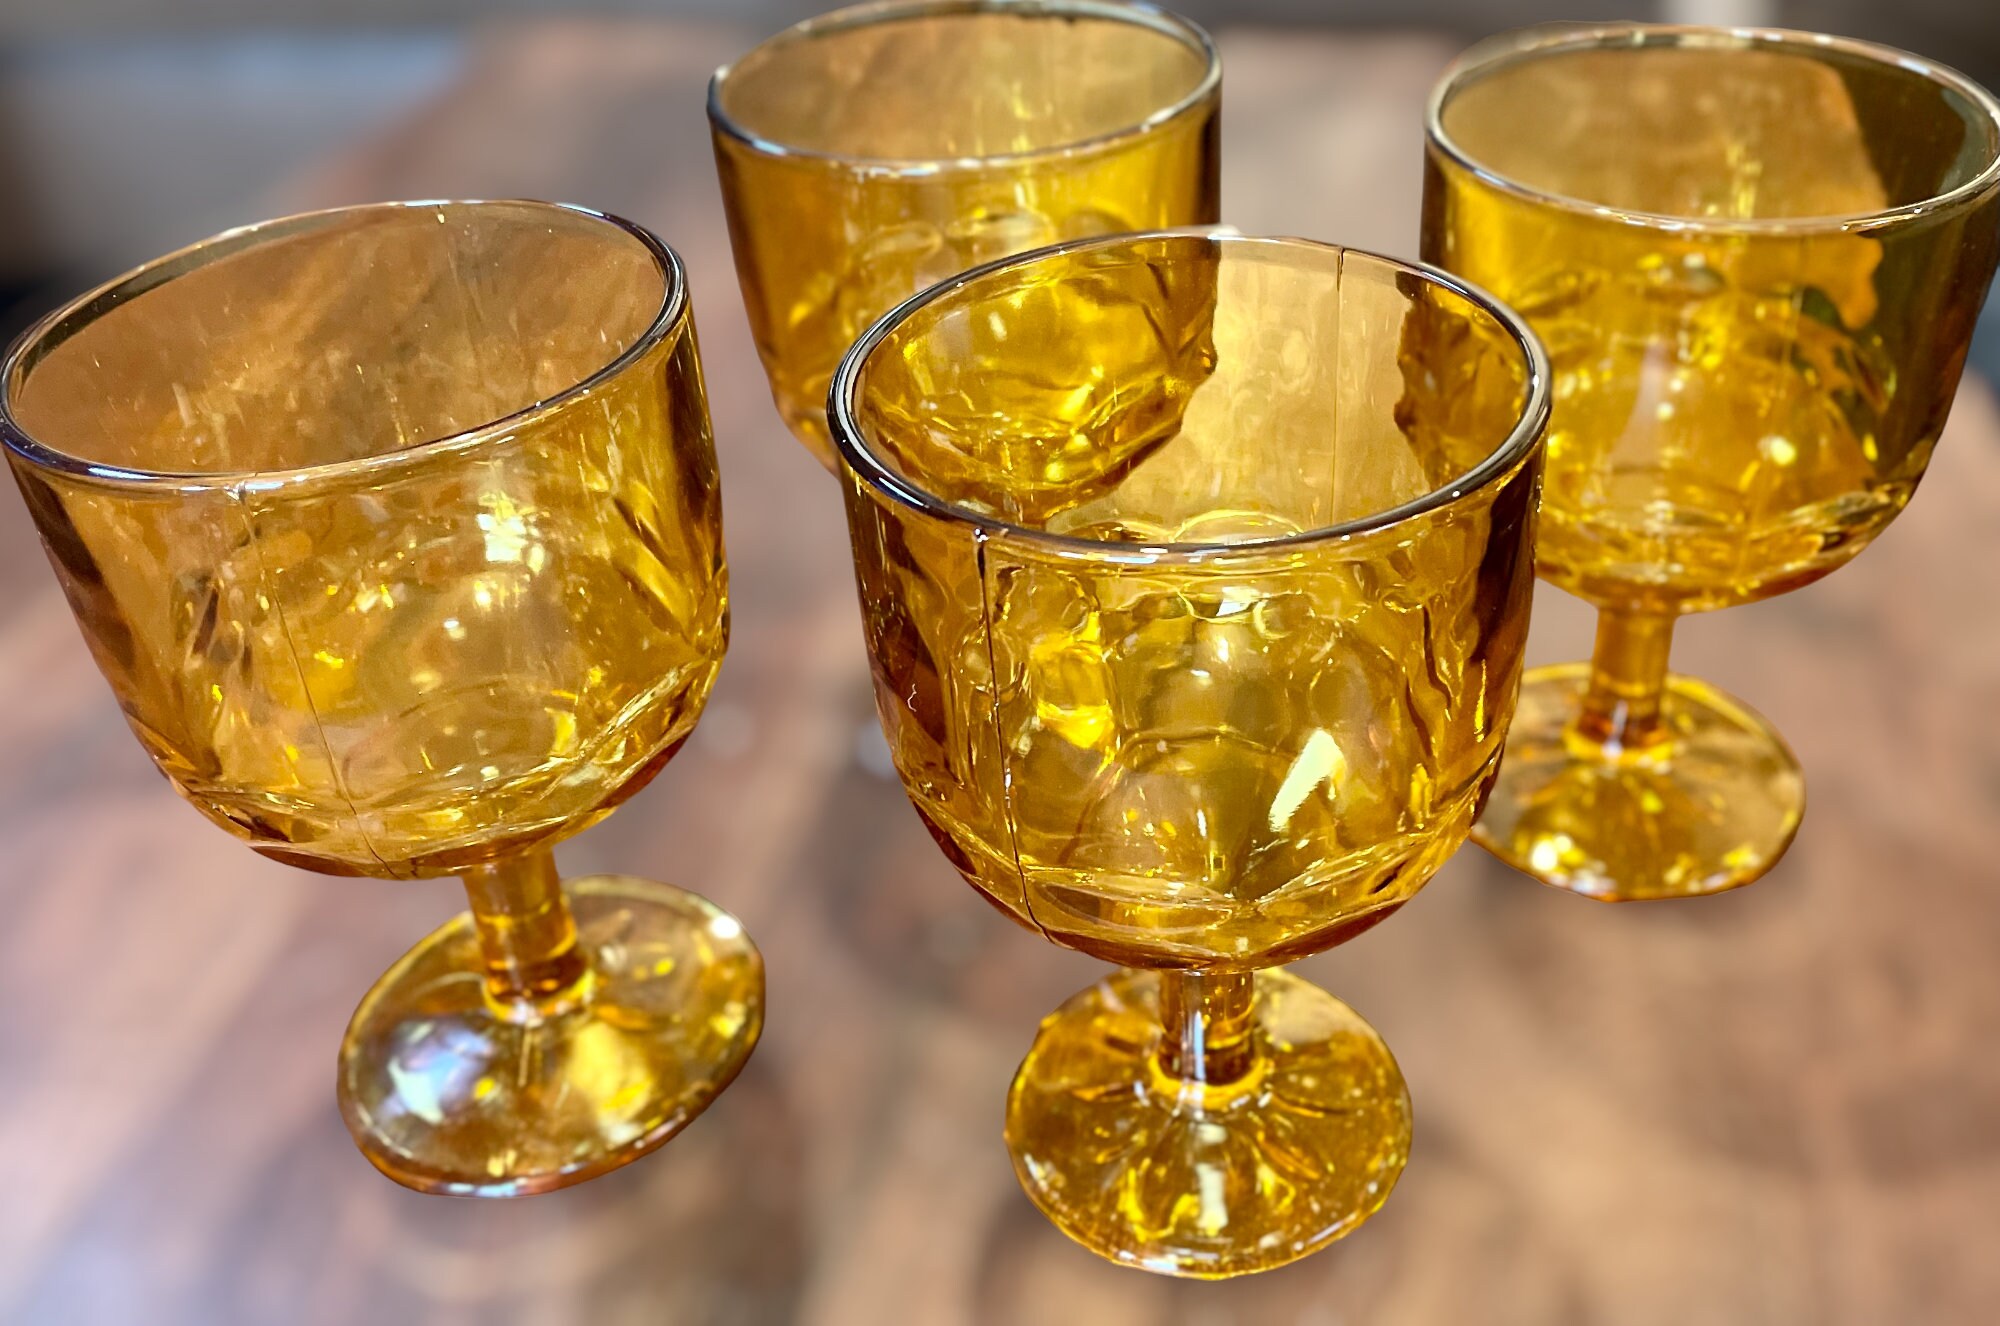 Vintage Amber Glass Pitcher & Goblets Set of 4 Glasses With Matching Pitcher  Retro Drink Serving Lemonade Pitcher Cute Gift by Lpuniquities 